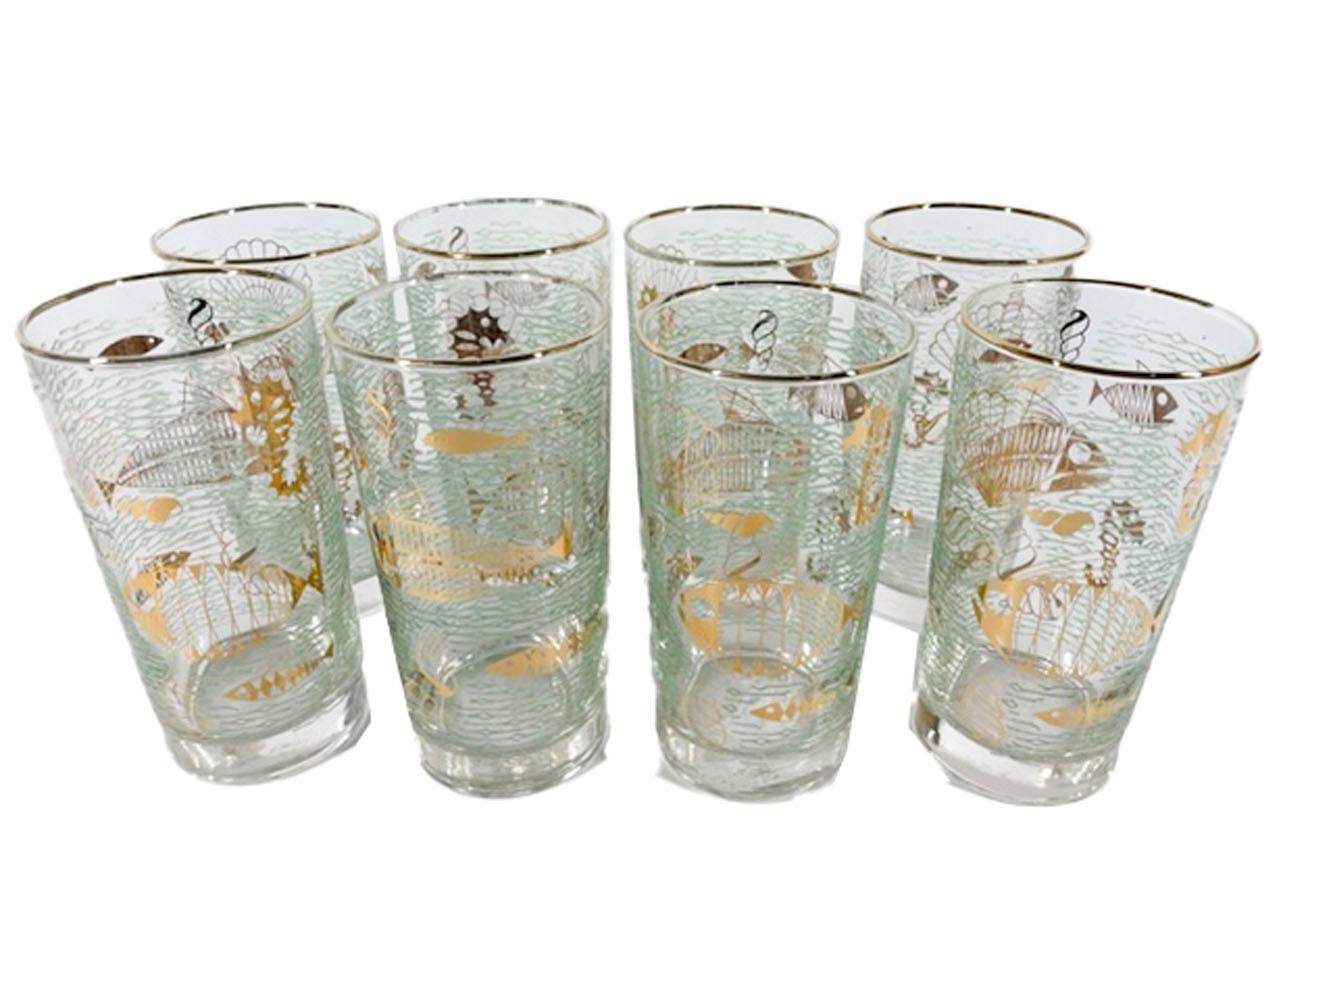 Eight Mid-Century Modern highball glasses by Libbey in the Atomic period Marine Life pattern with stylized fish in 22k gold against a ground of raised green translucent waves. This set comes with a gold-tone wirework caddy.